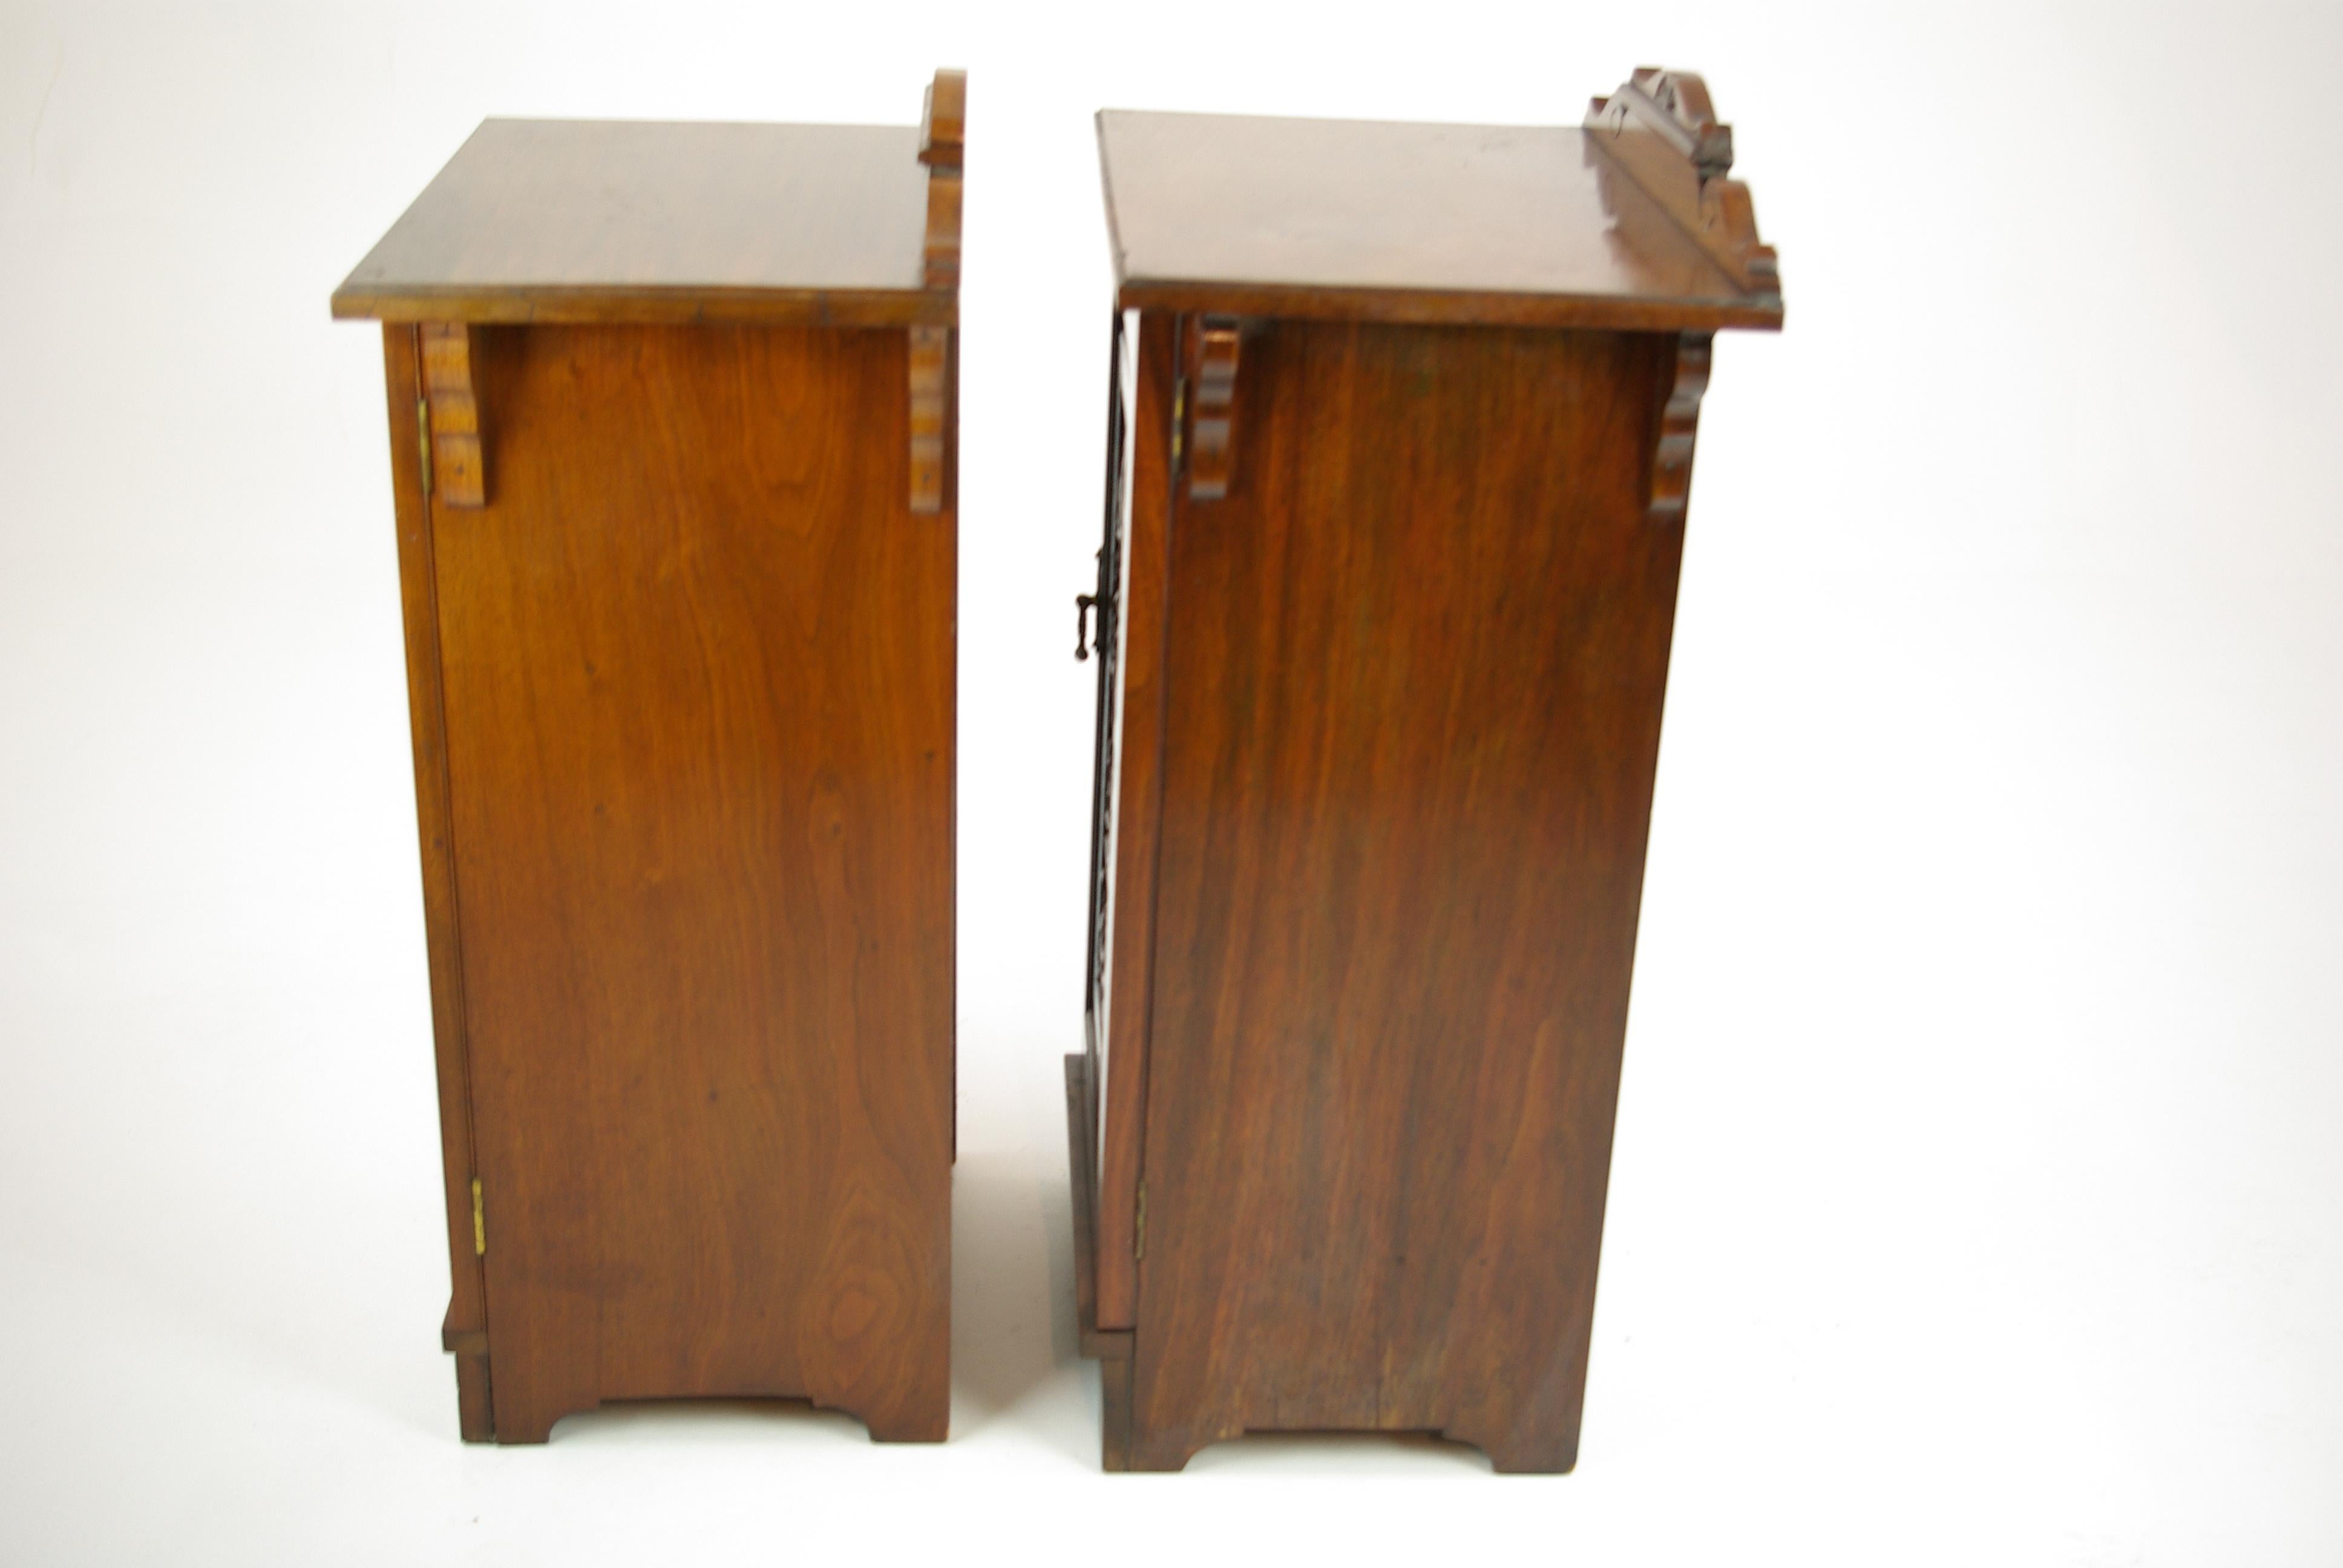 Antique Nightstands, Pair of Nightstands, Bedside Tables, Lamp Tables 2